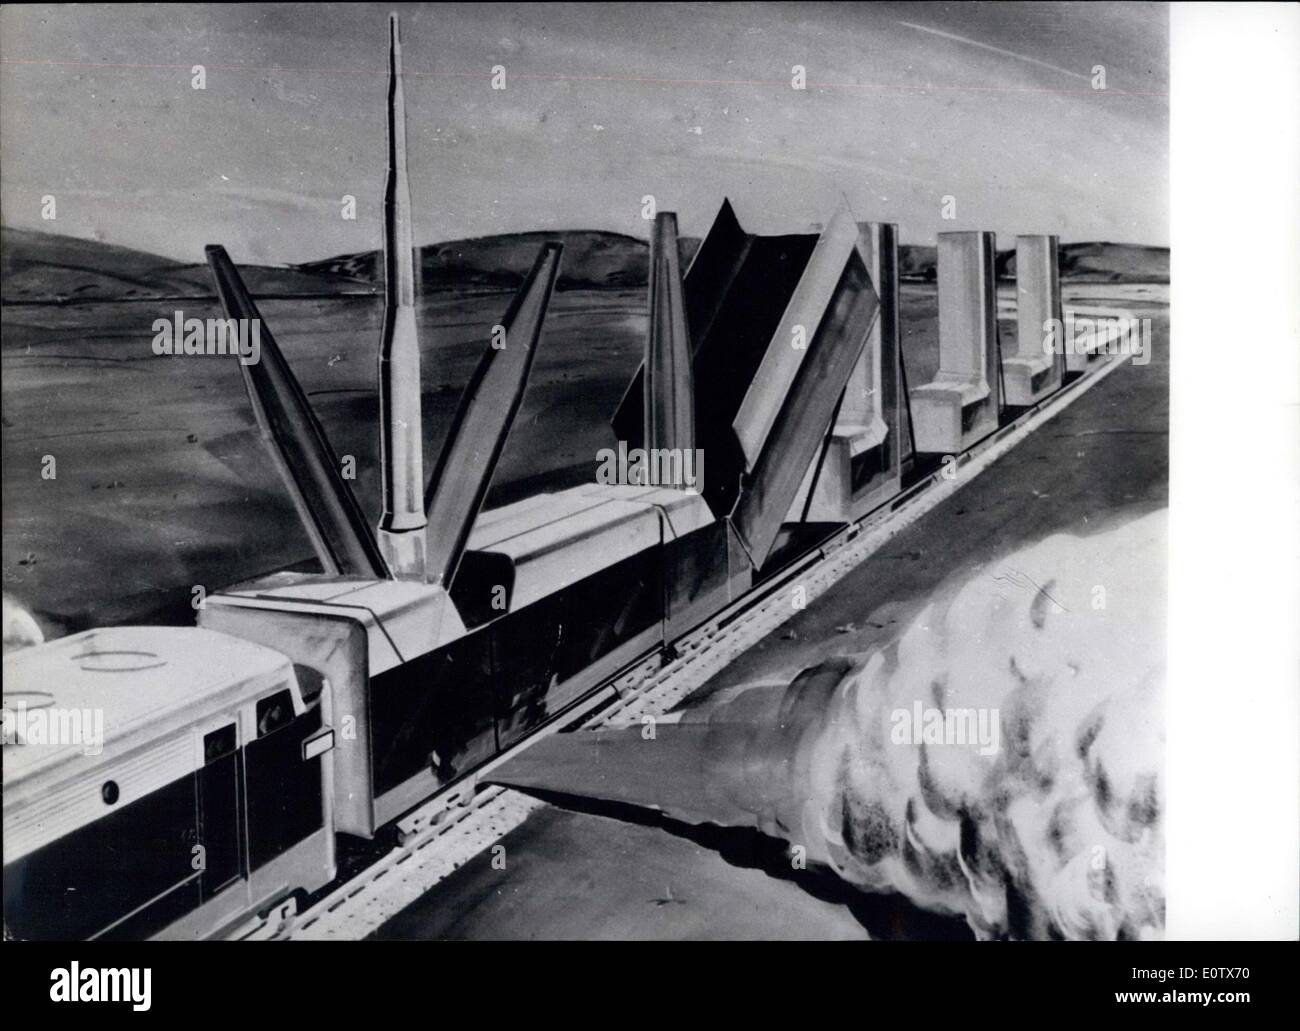 Aug. 29, 1960 - Rocket Launching Pads In tank trains: Tank trains with launching for the International ''Minuteman-rocket are planned by US air-force as latest deterrent missile. These moving rocket bases are to be continually moving along the American railways and build an unreachable goal for a possible aggression. Picture shows an artist's impression on such a rocket train with the ''Minuteman'' ballistic missiles in various stages from horizontal travelling position to vertical firing position. Stock Photo